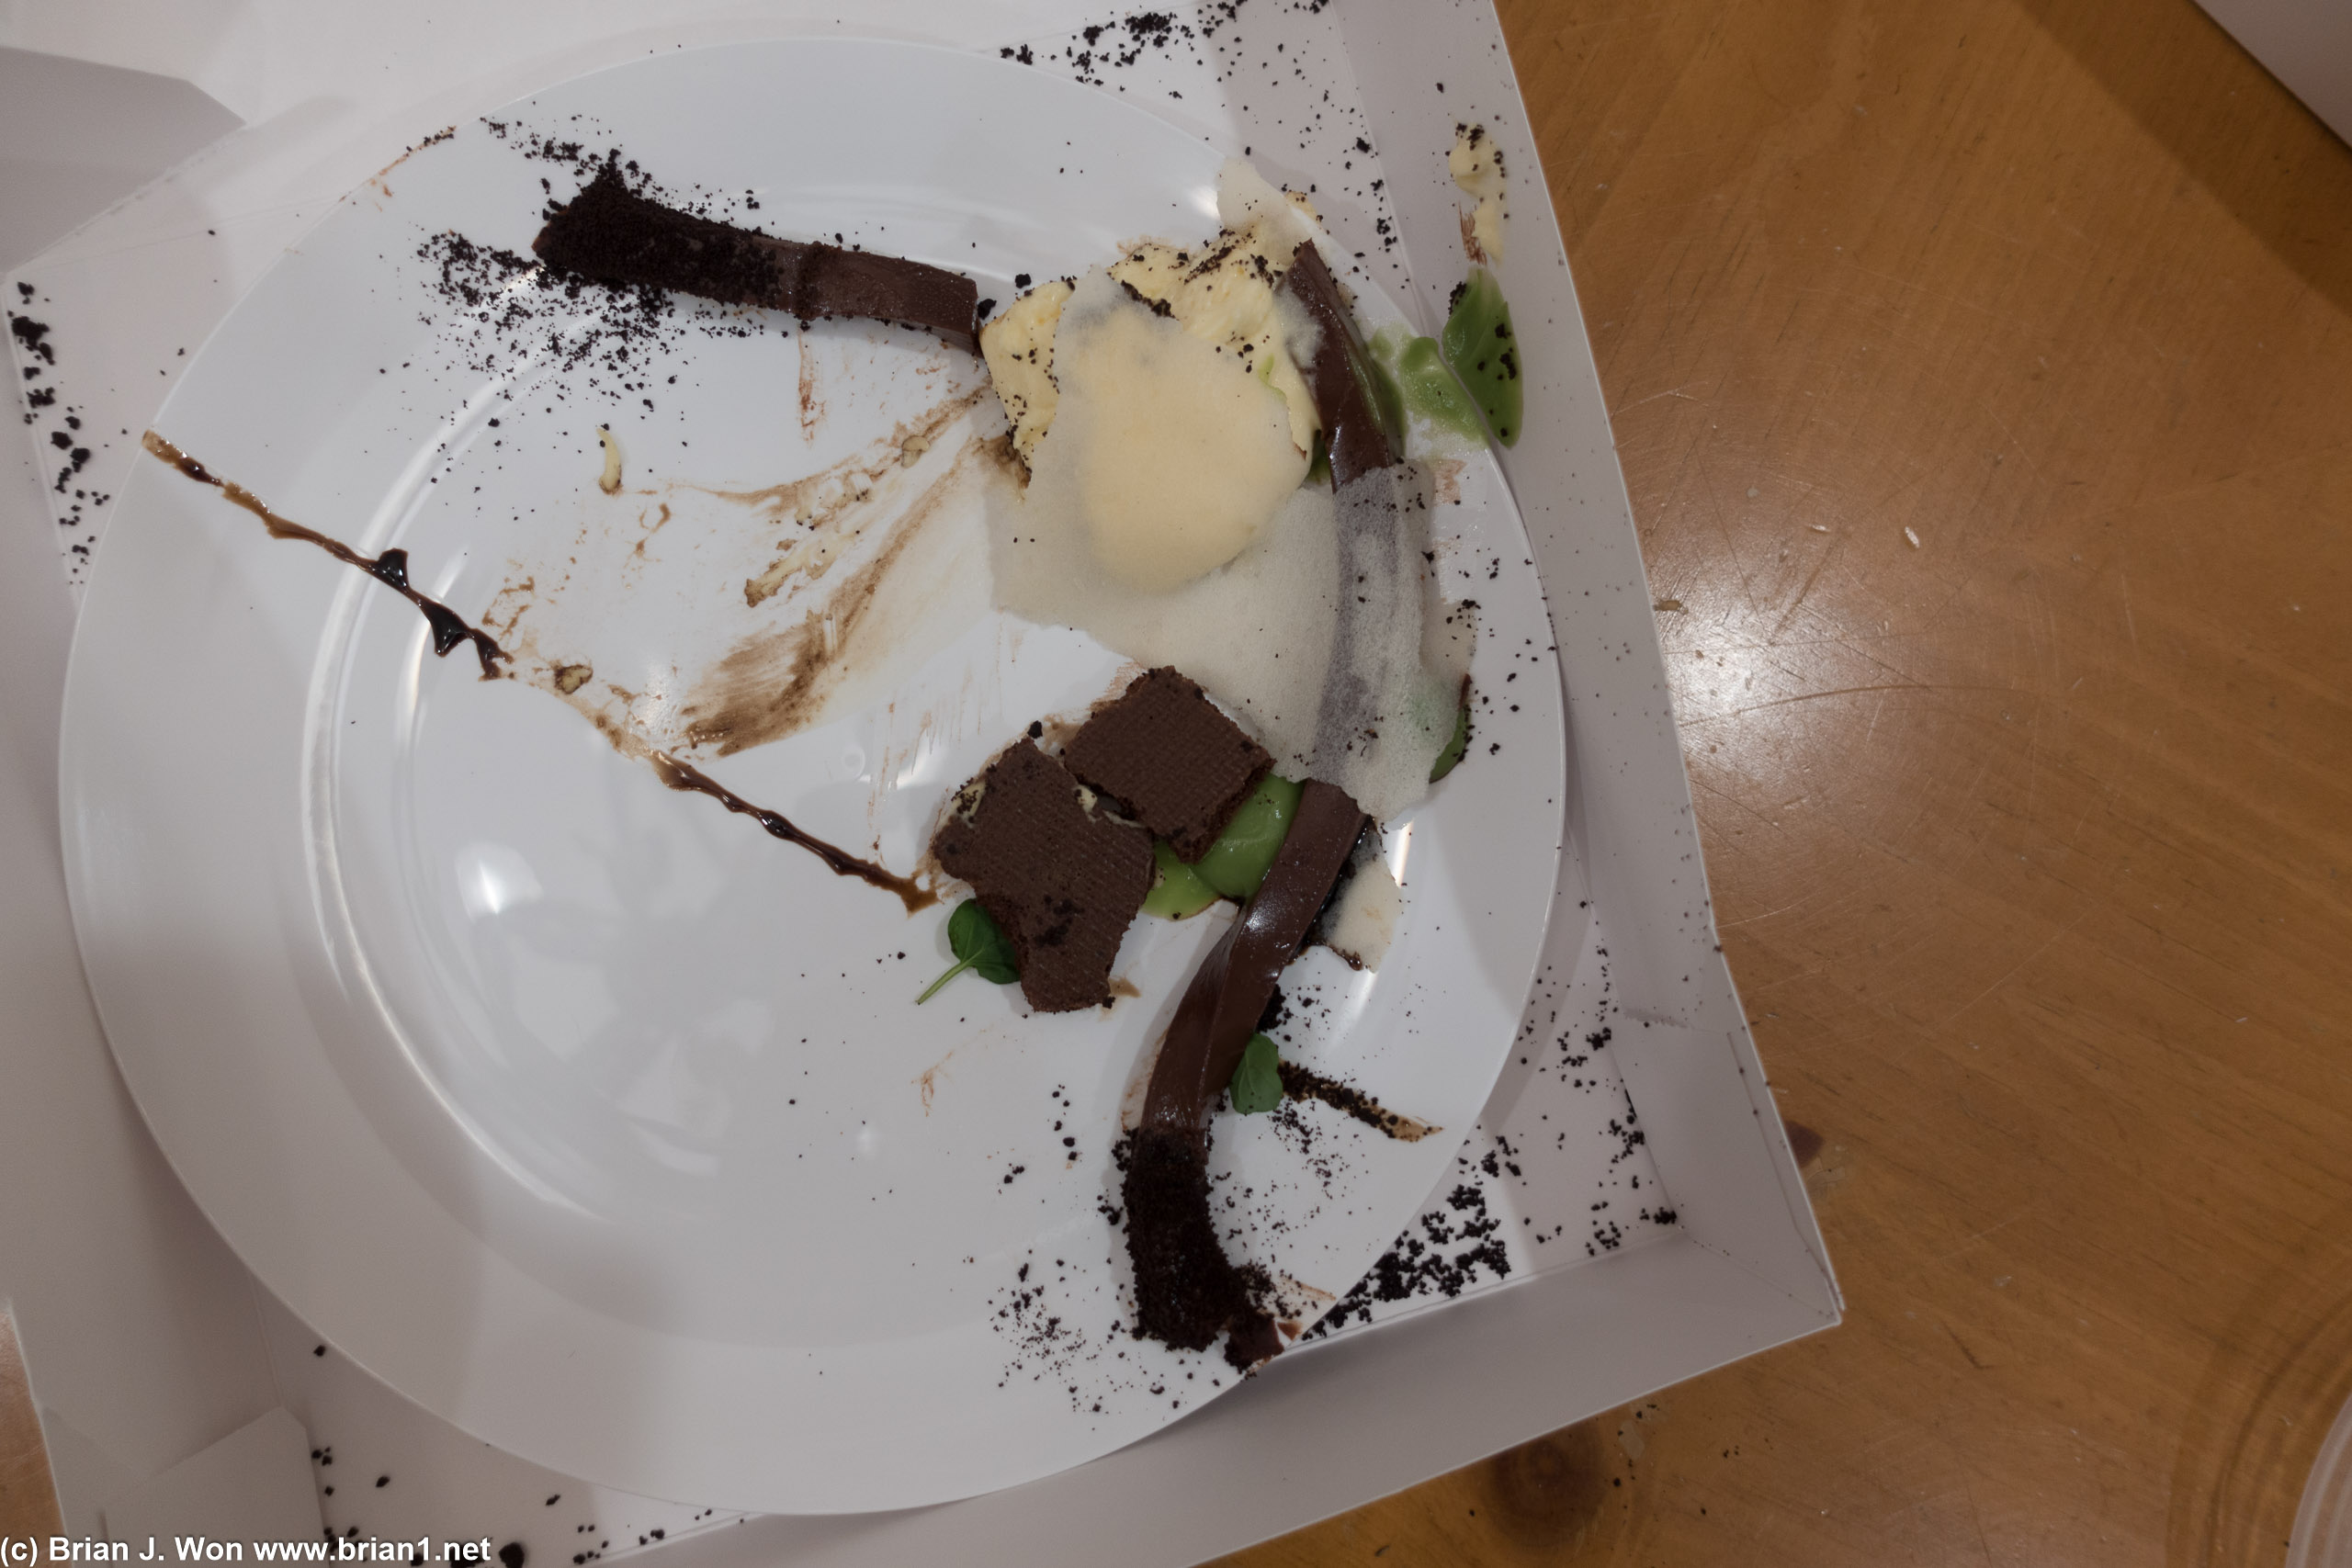 I tipped over the dessert box and ruined their beautiful plating. ;_;